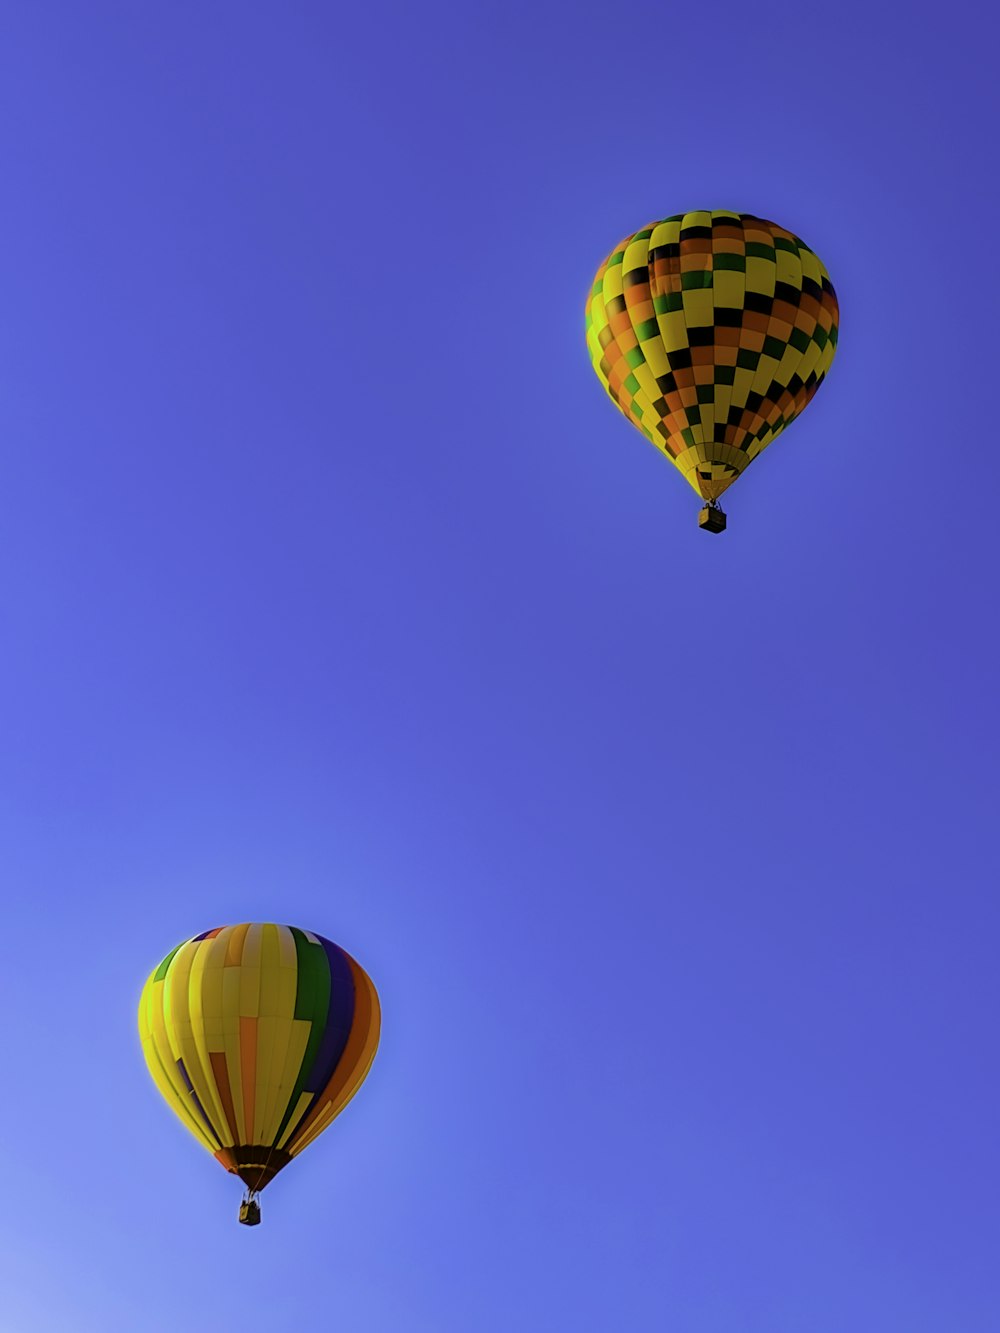 yellow green and red hot air balloon in mid air under blue sky during daytime